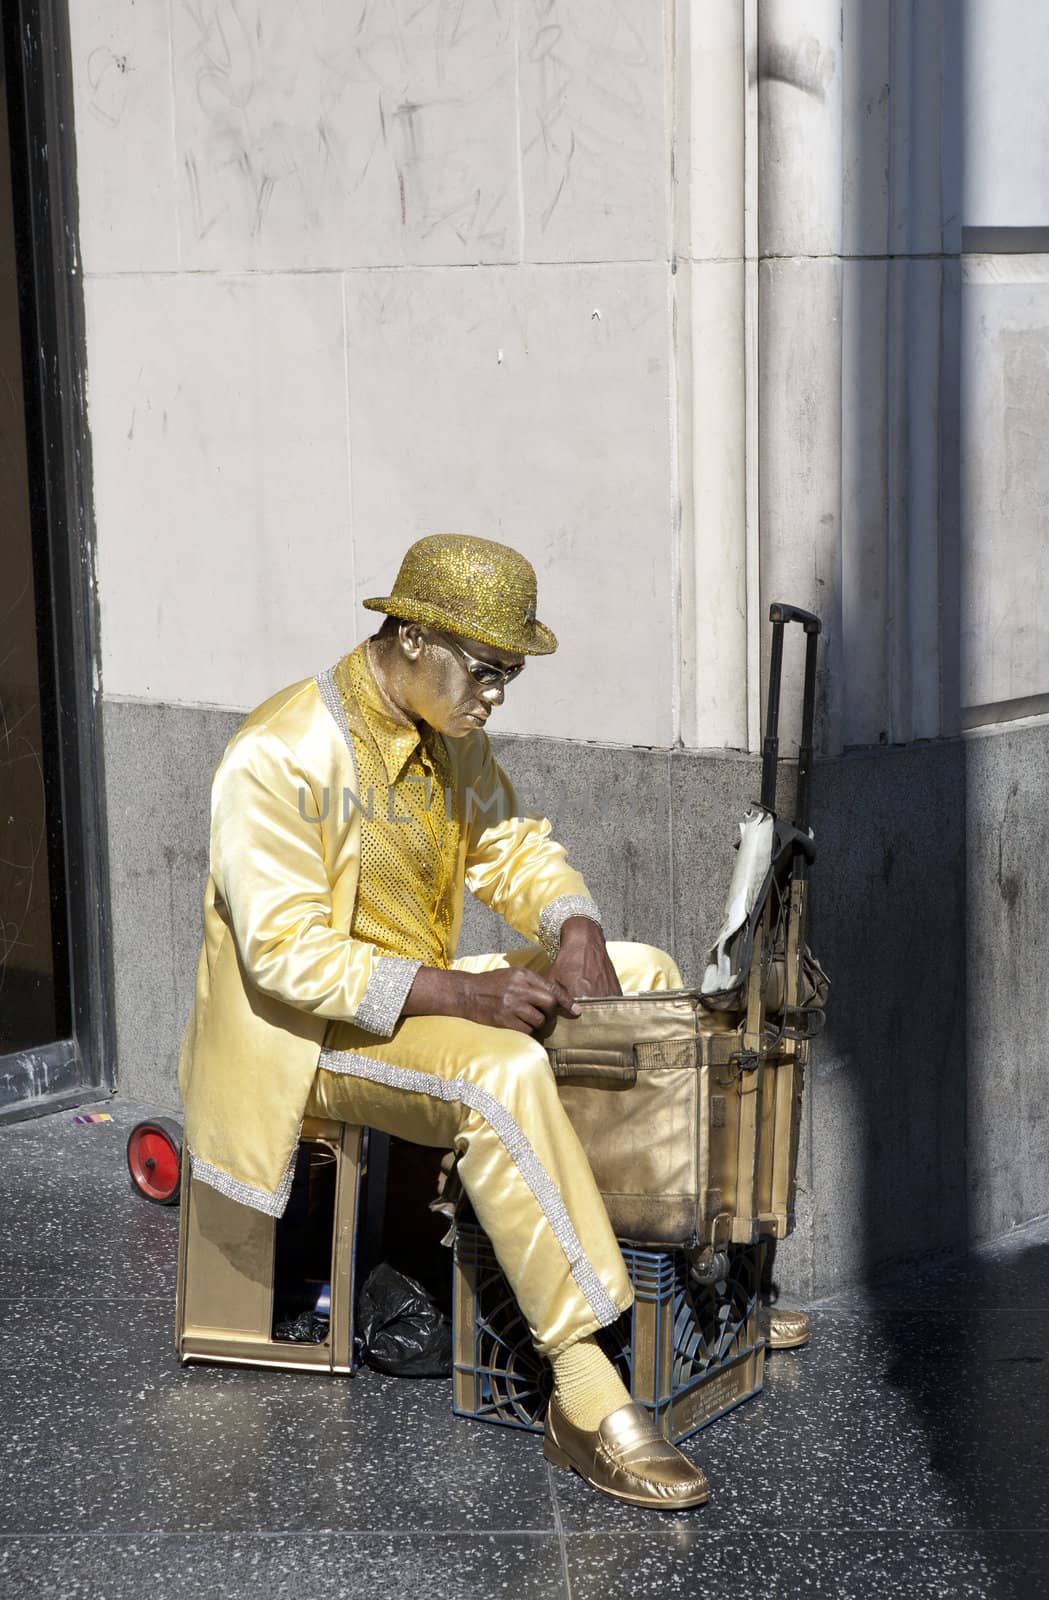 Golden street performer in Hollywood by GeneG